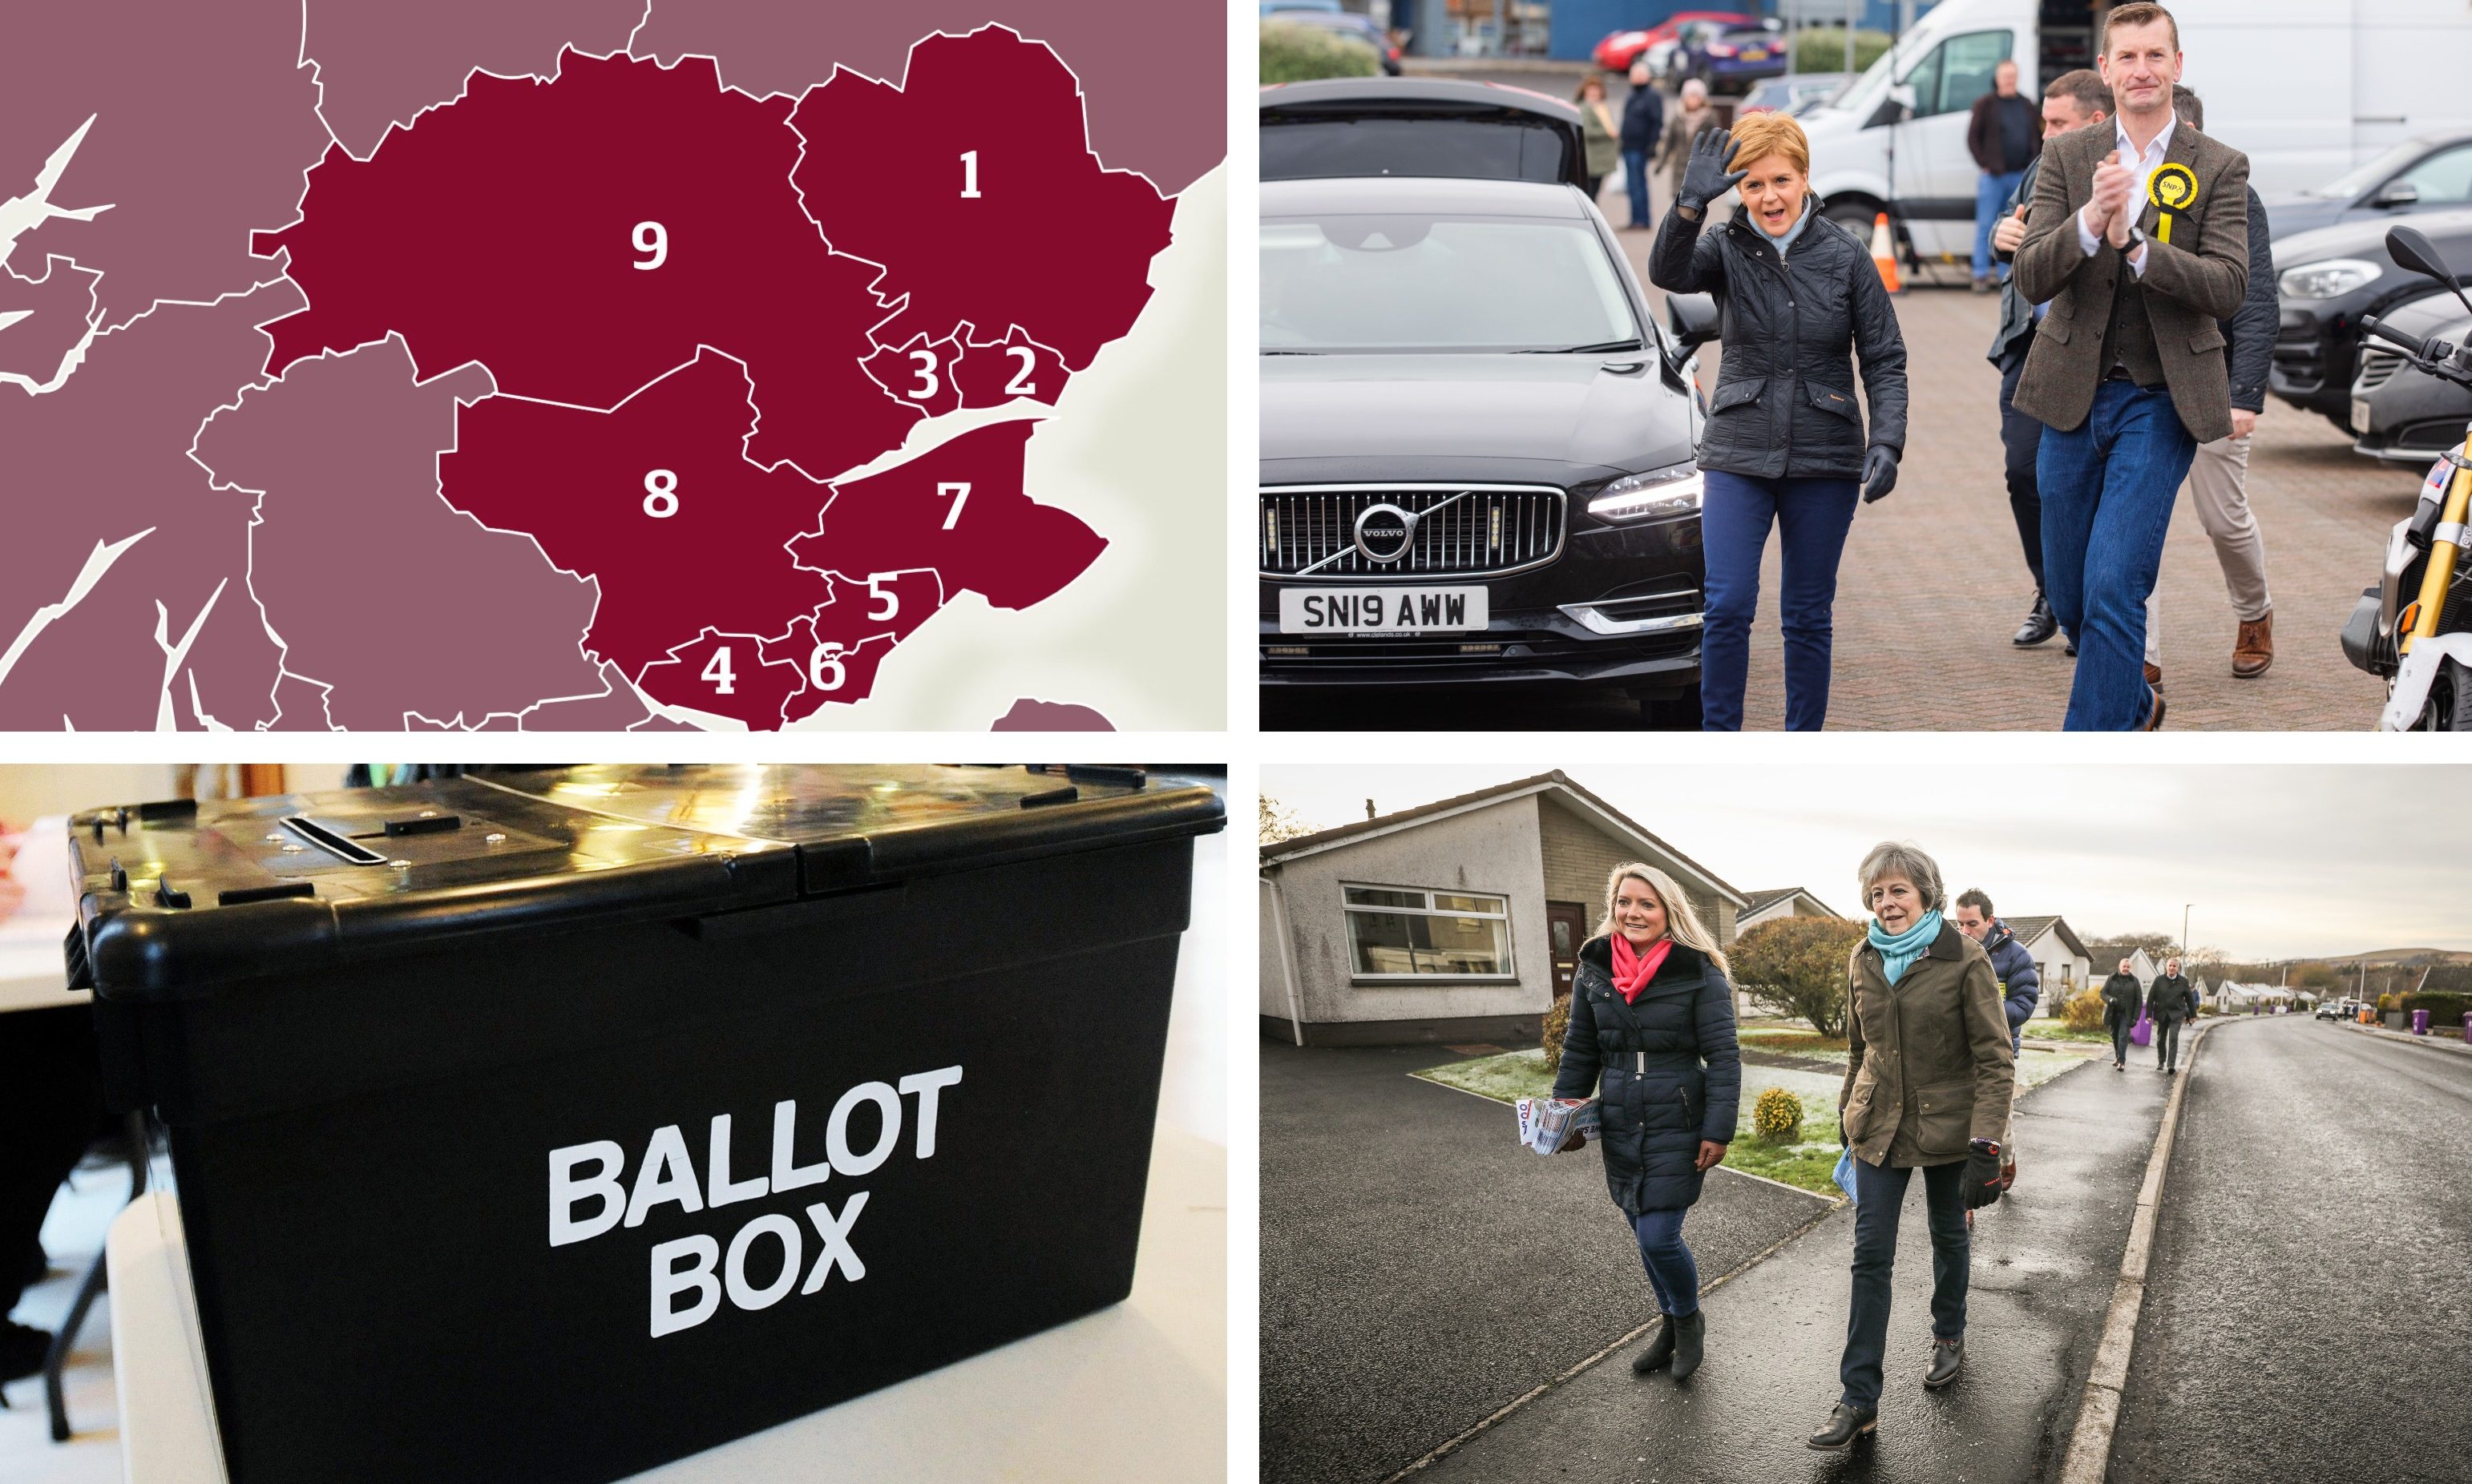 Local candidates have been hitting the streets ahead of the December general election.